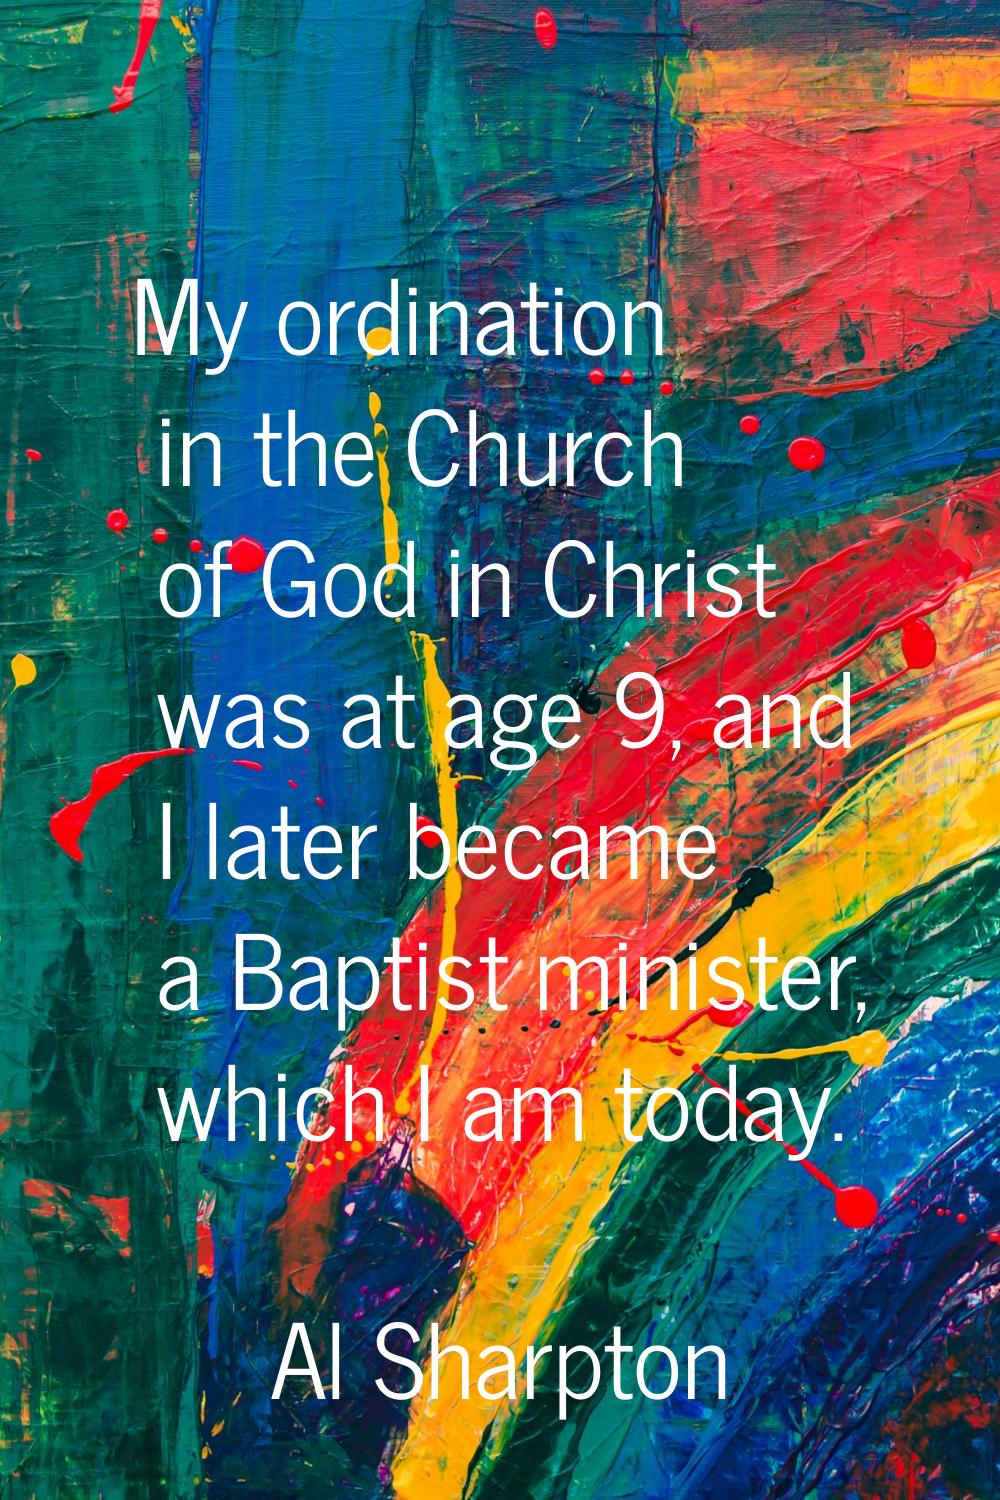 My ordination in the Church of God in Christ was at age 9, and I later became a Baptist minister, w